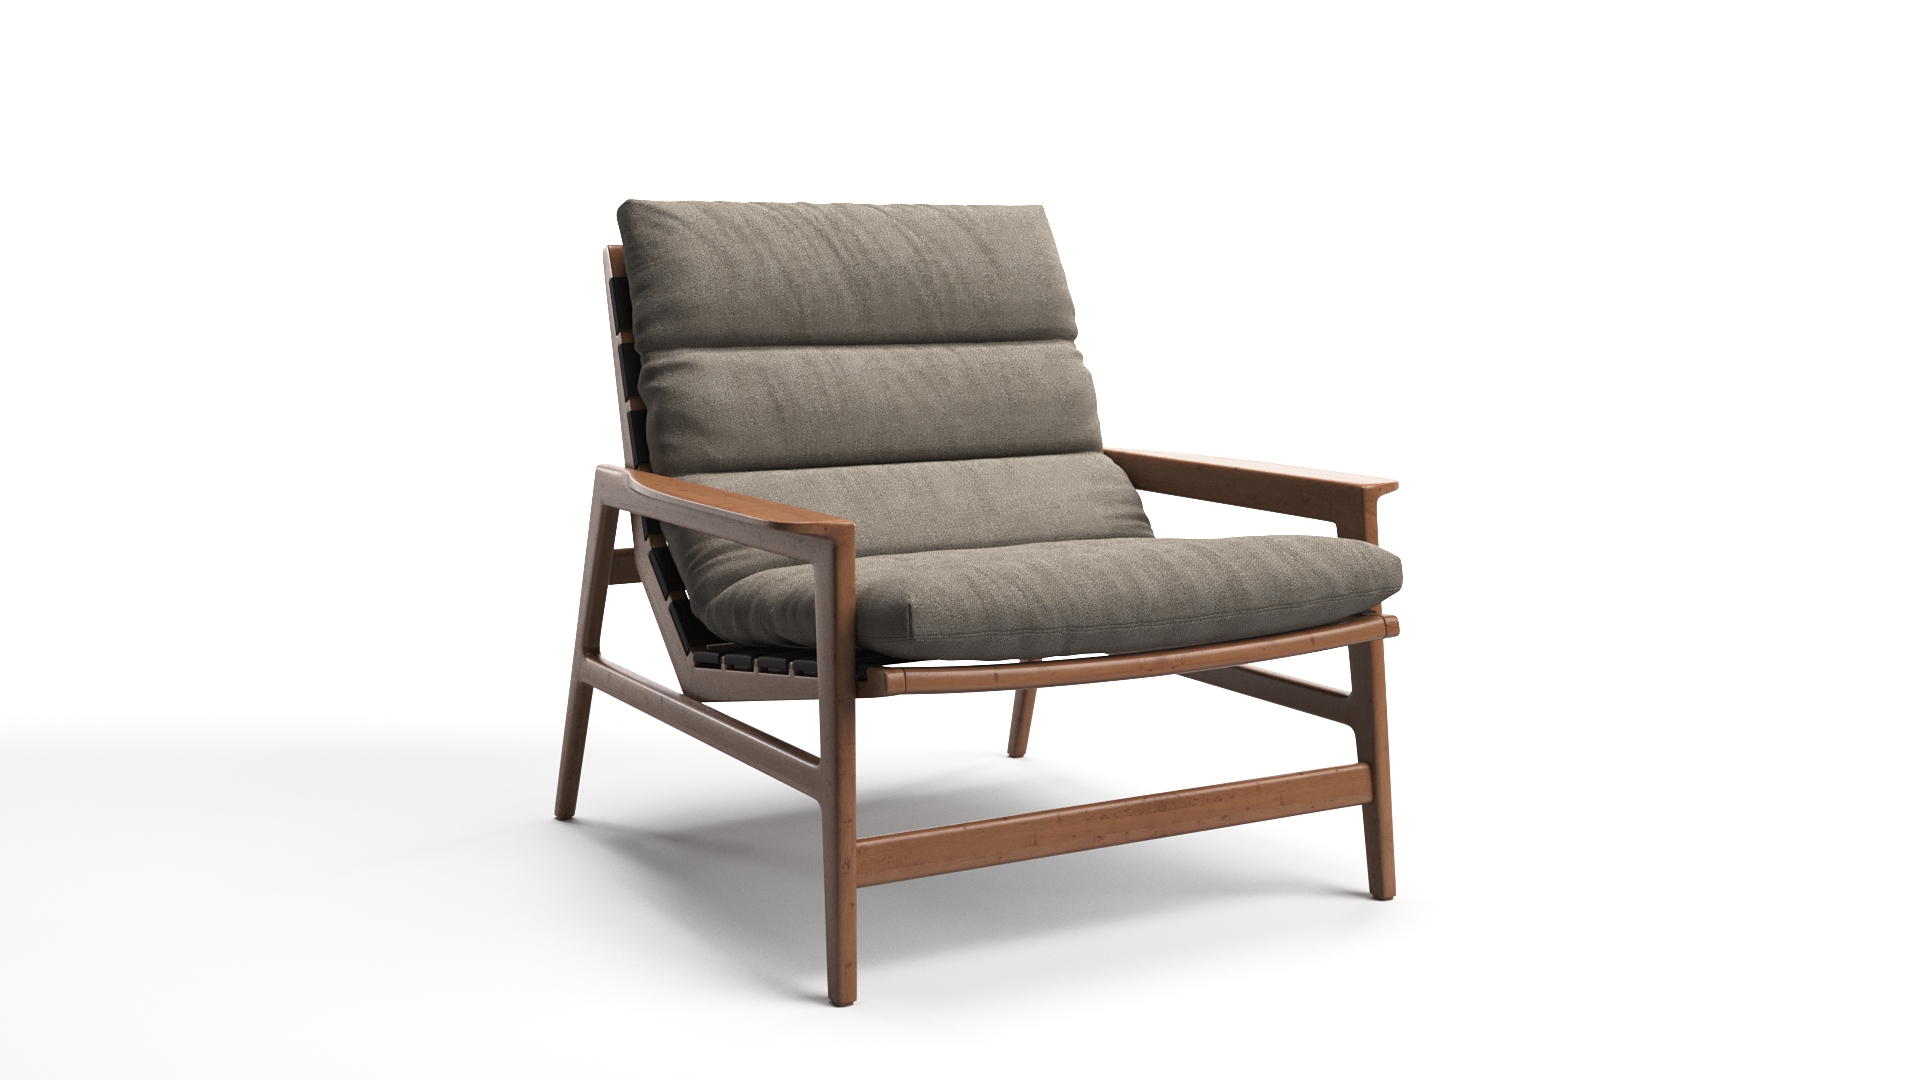 Photorealistic 3D Model of a Brown Chair for a Furniture Catalog